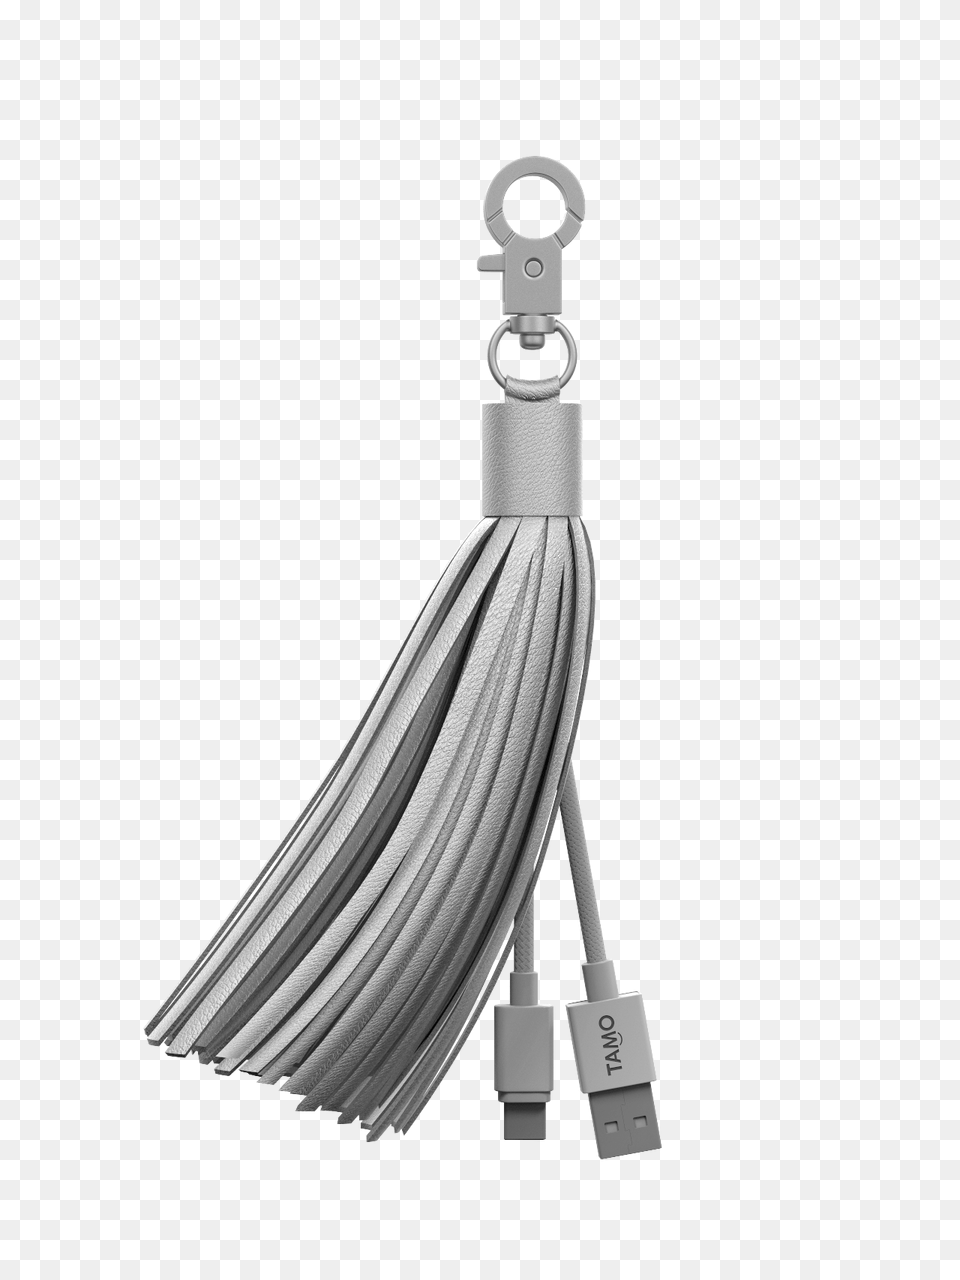 Tamo Tassel Chargers Leather Tassels With Charging Cables, Smoke Pipe, Electronics Free Transparent Png